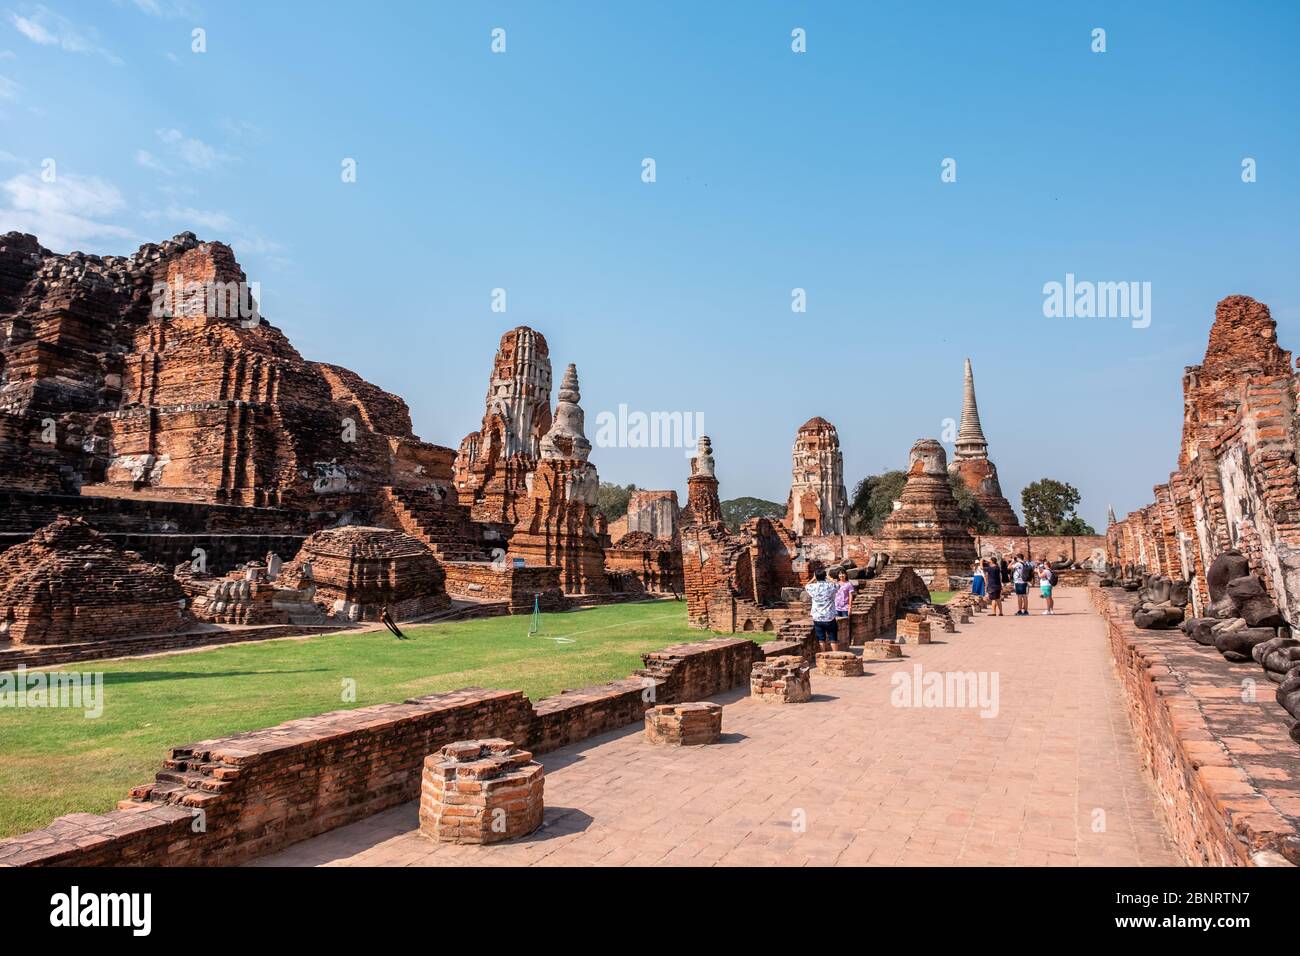 Name of this place ' Wat Mahathat ' temple and another spelling is ' Wat Maha That 'the temple in Ayutthaya Province, Bangkok Stock Photo